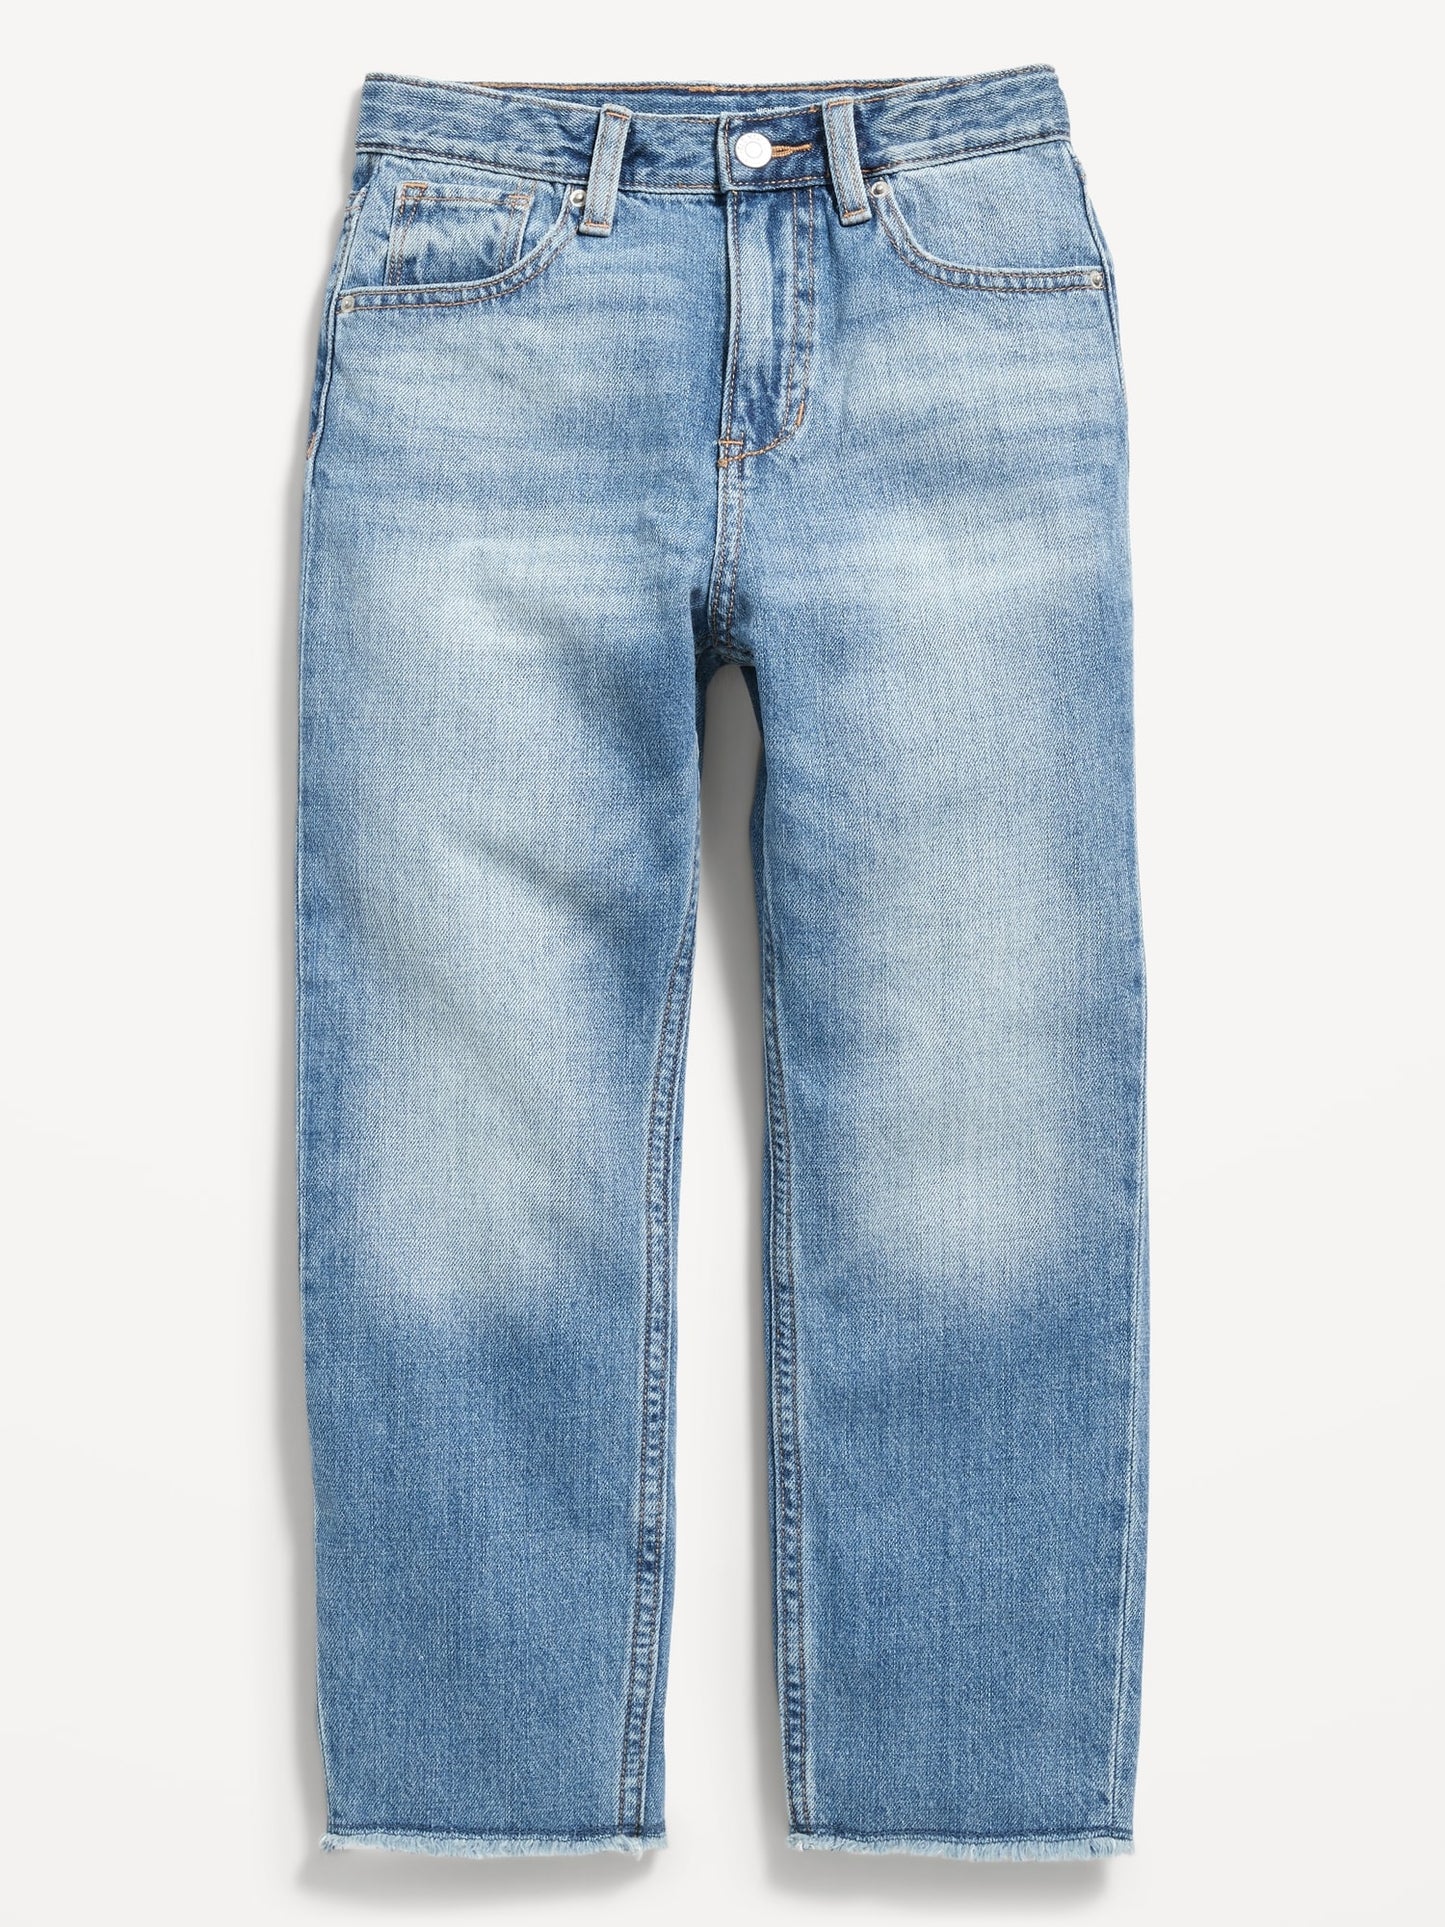 High-Waisted Slouchy Straight Built-In Tough Jeans for Girls